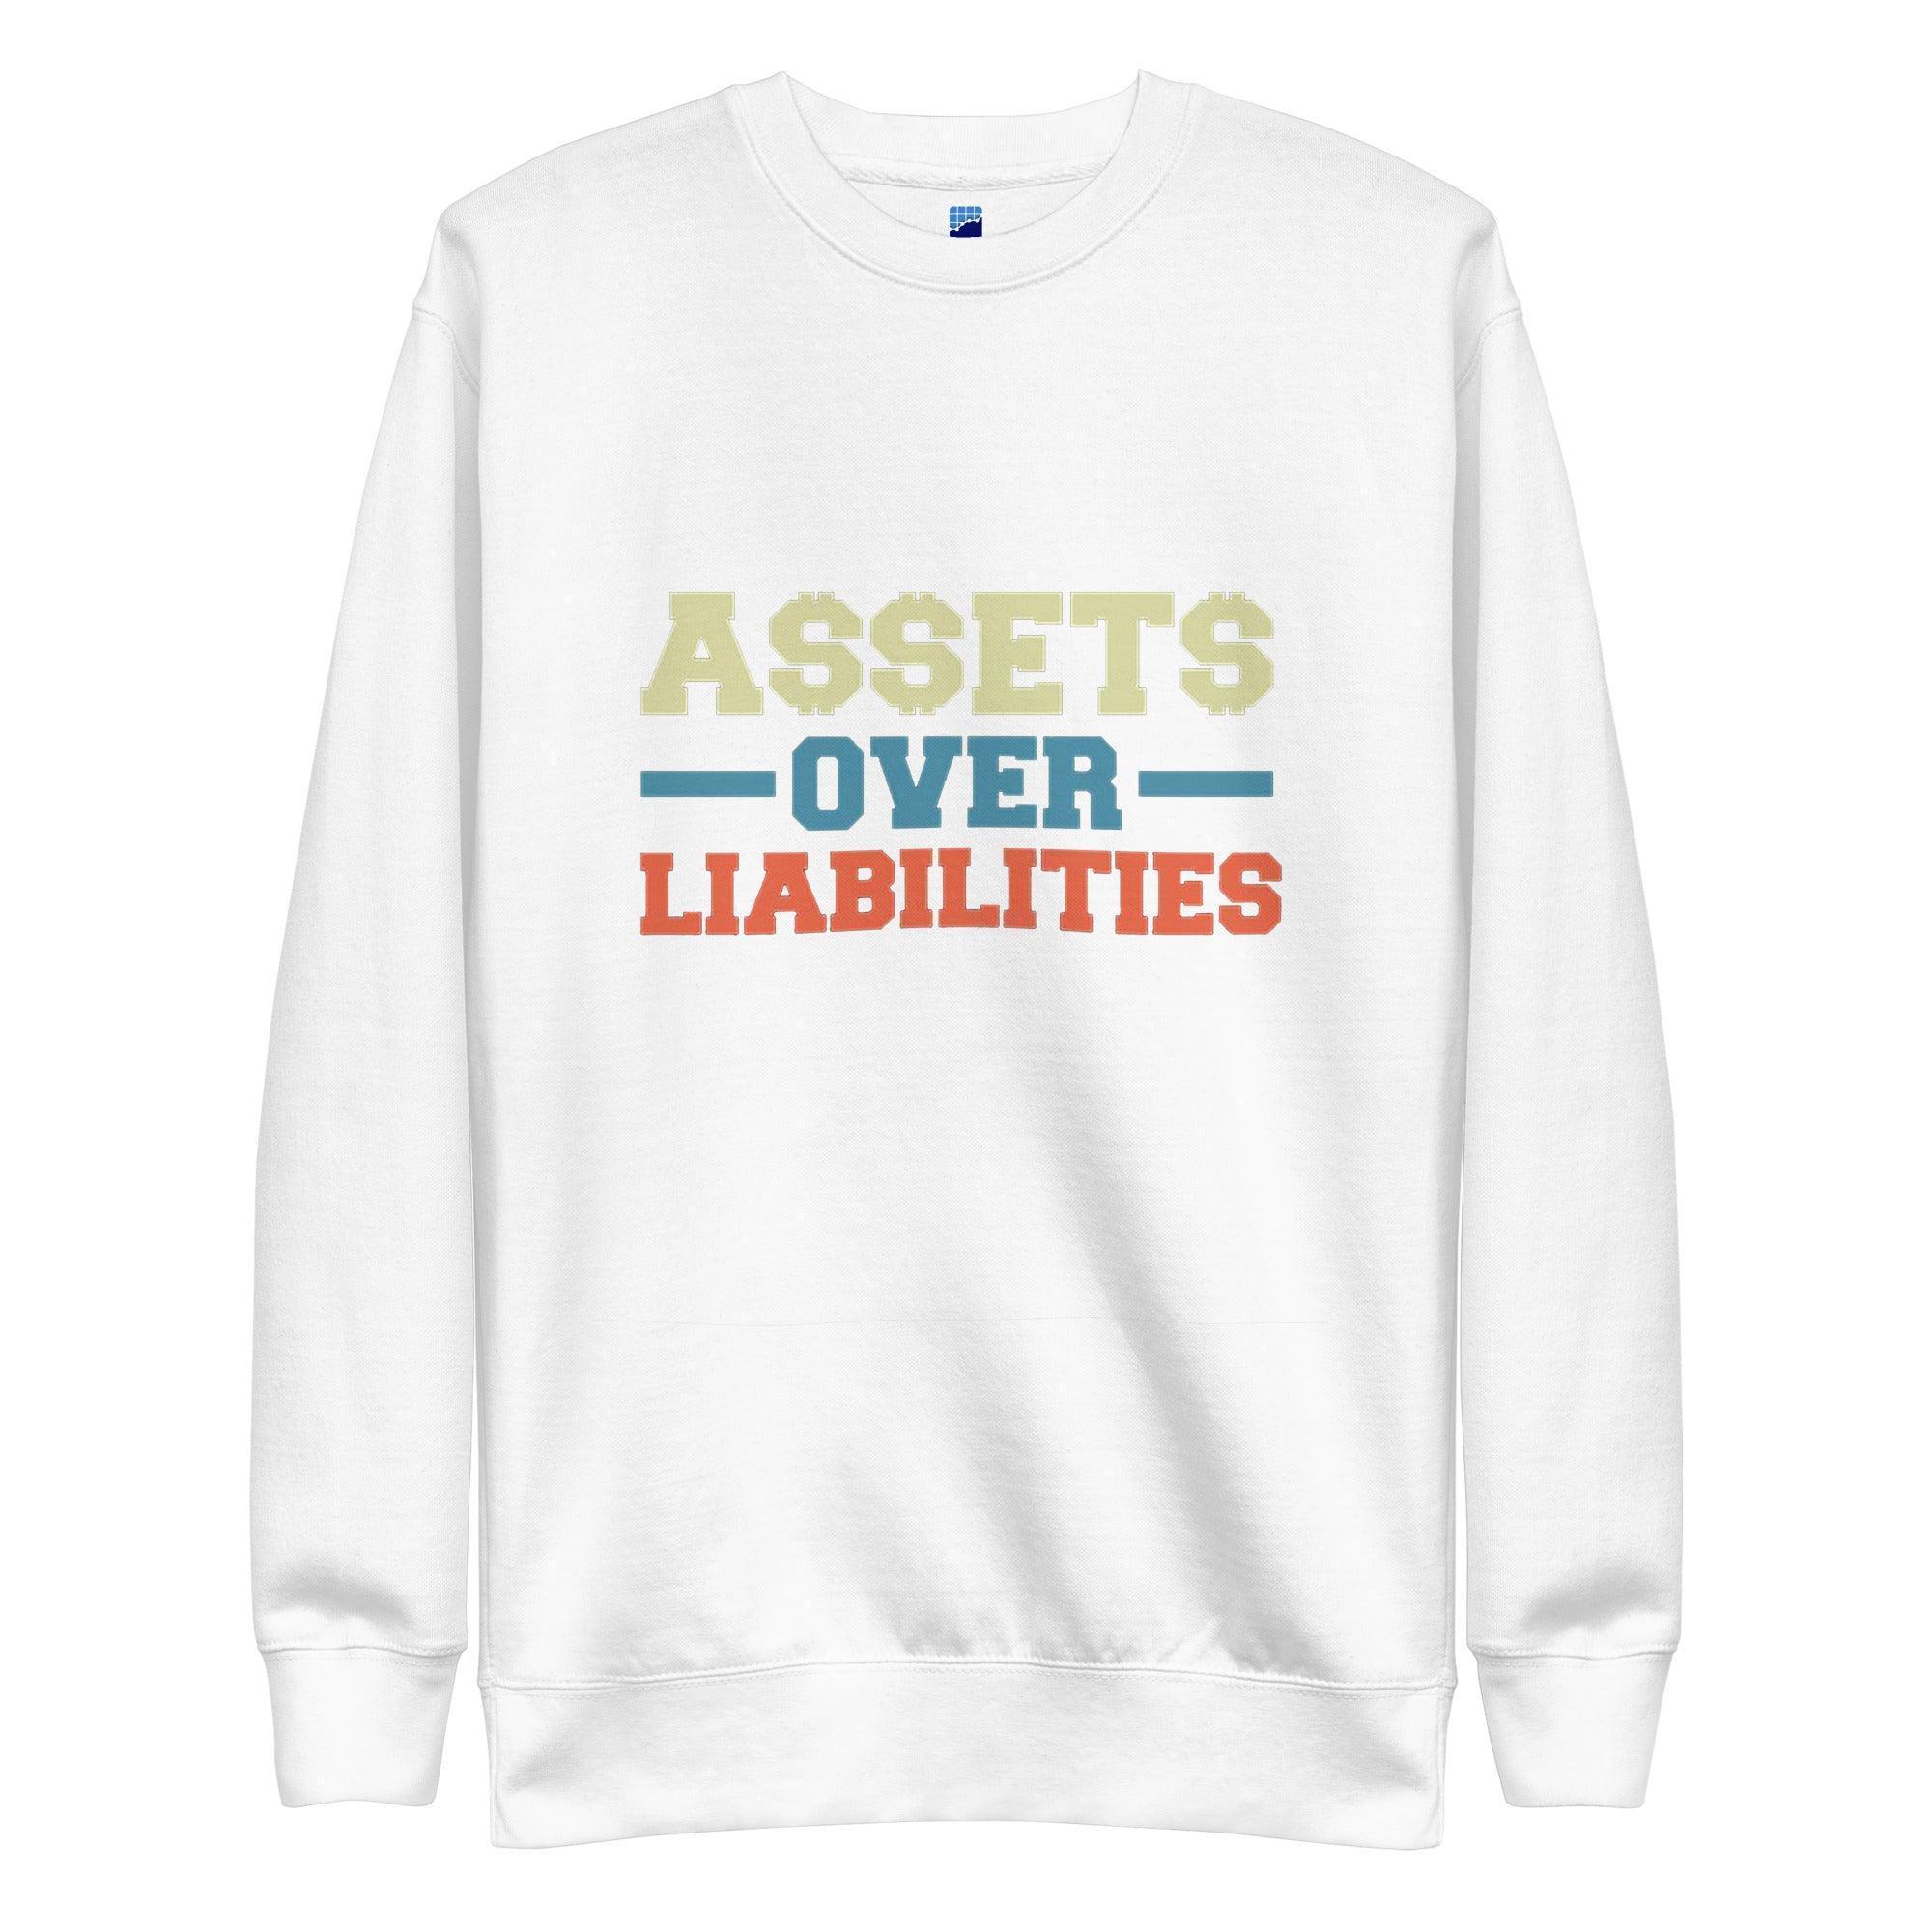 Assets Over Liabilities Color Sweatshirt - InvestmenTees